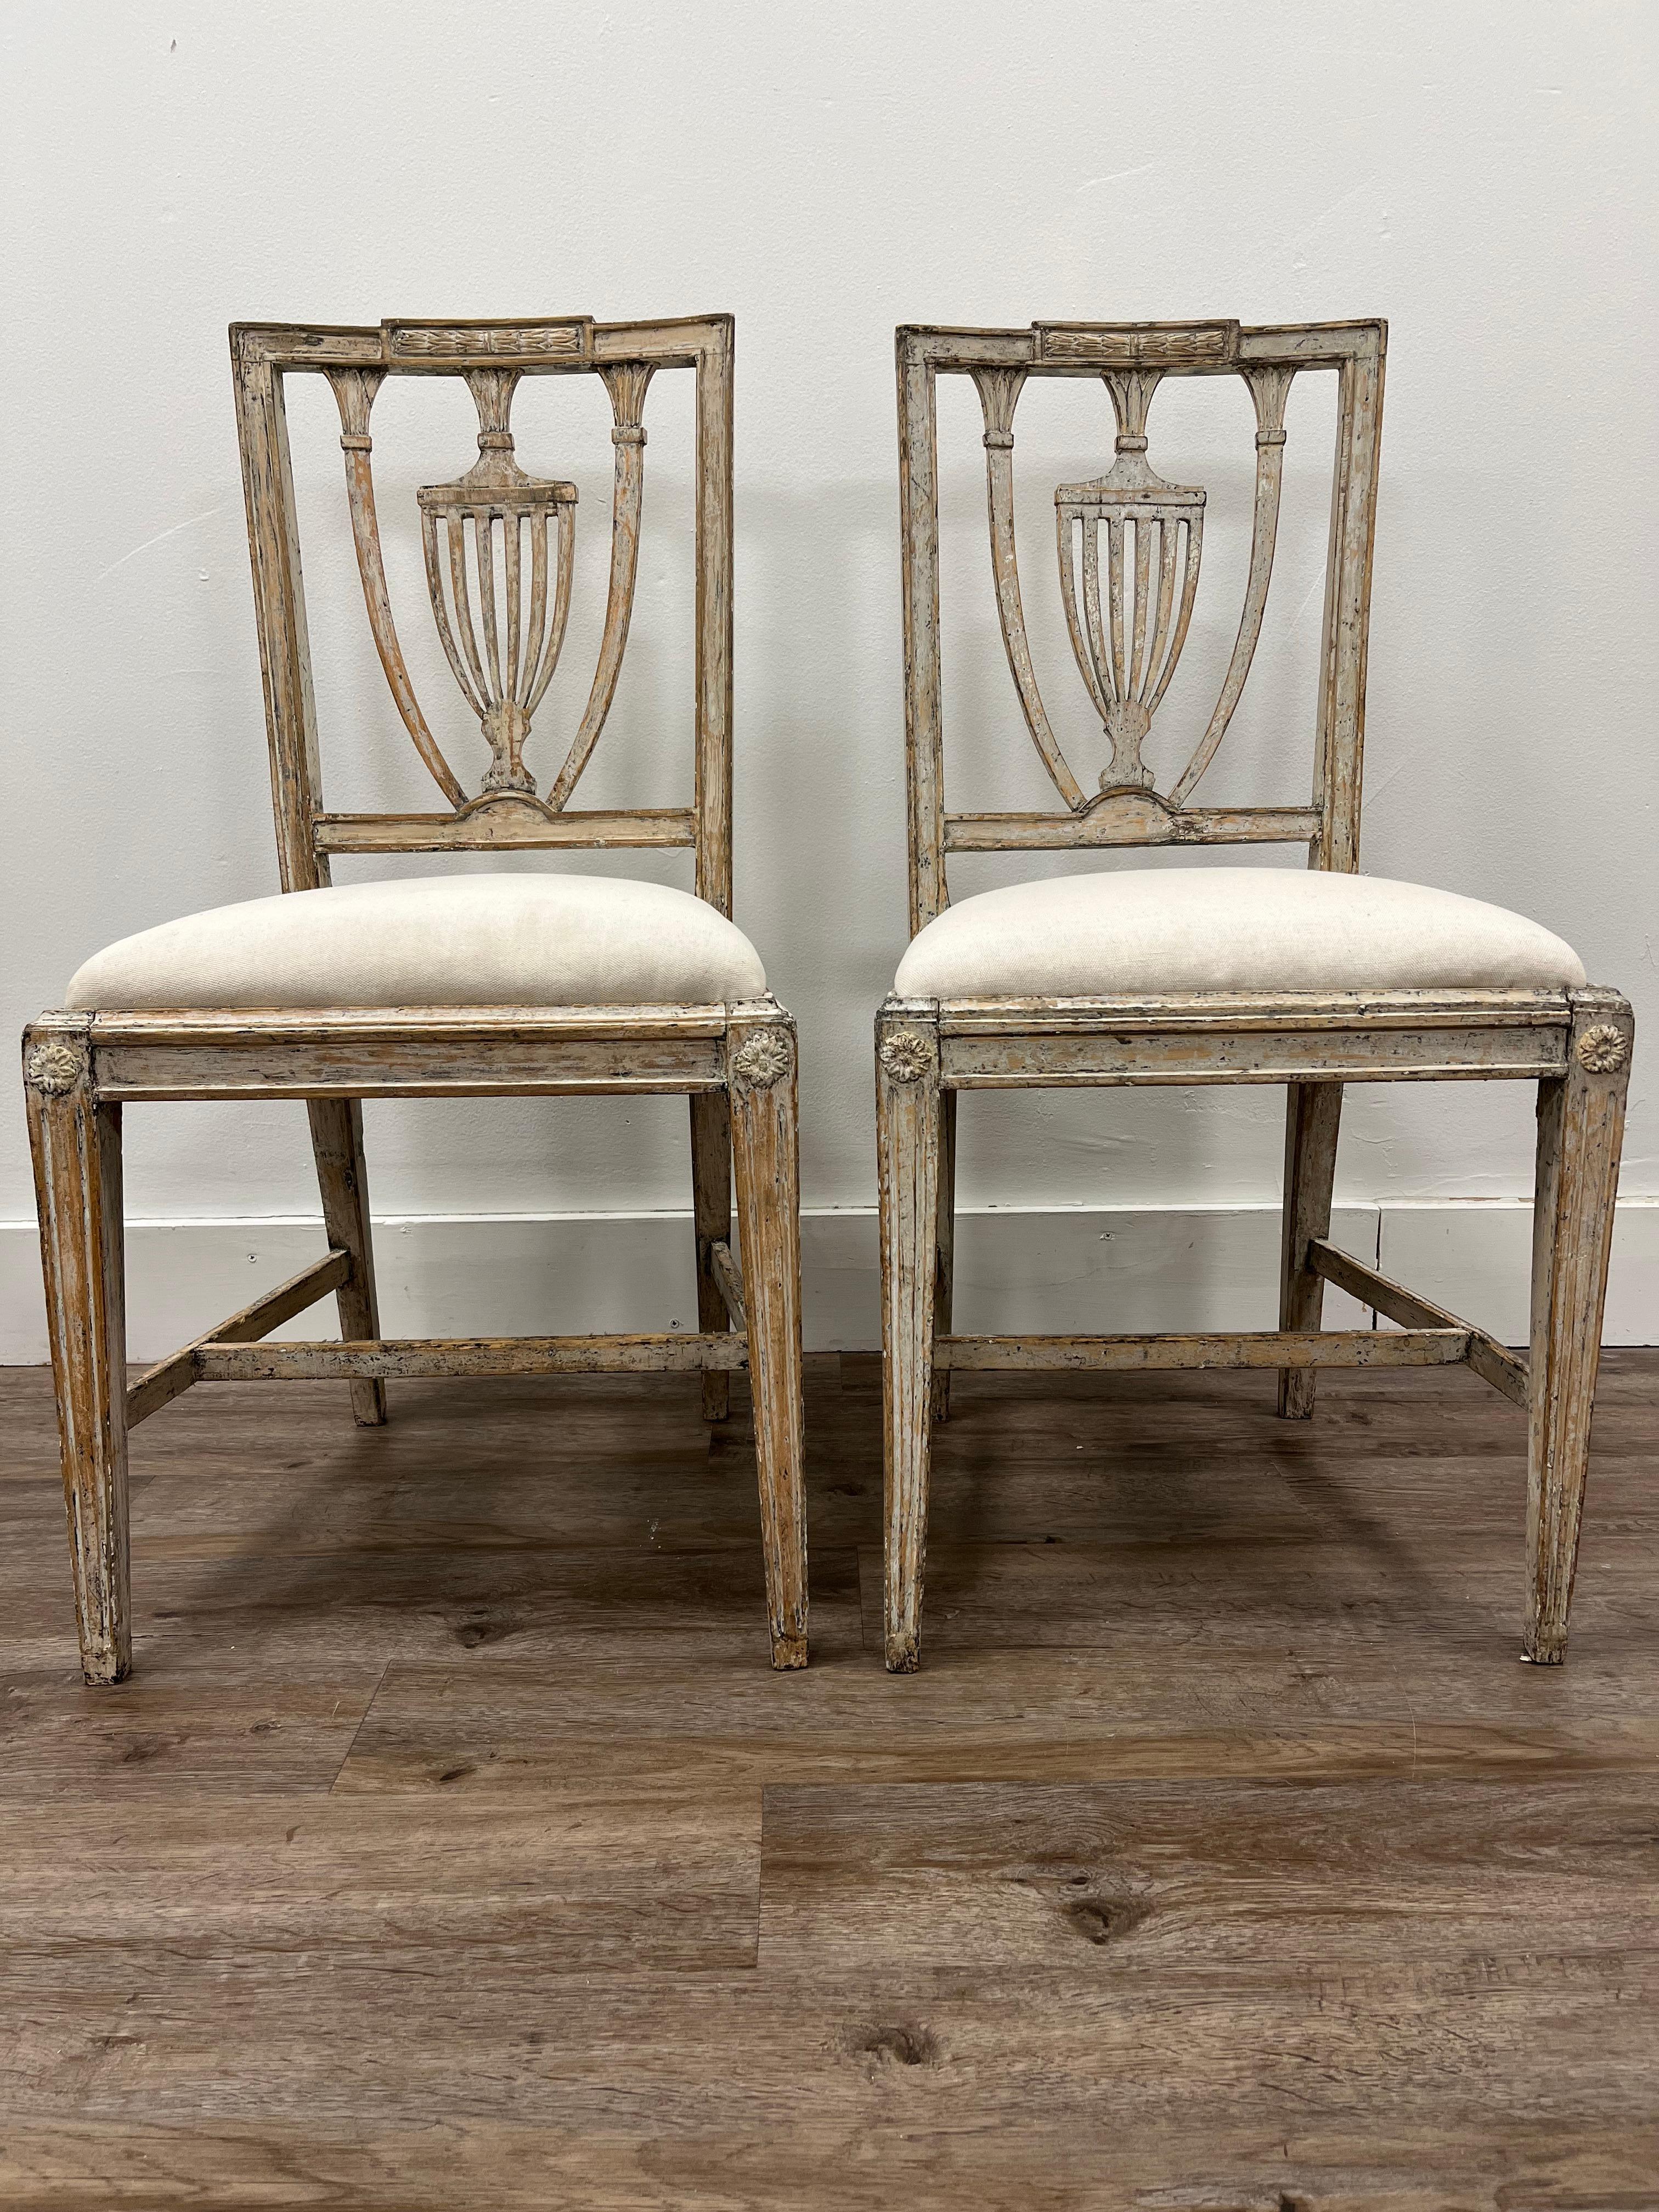 A pair of Swedish Gustavian chairs made in Stockholm by master craftsman Melker Falkberg (1746 - 1822). Stamped with Stockholm chairmaker's seal and maker signature. Scraped to their original pale grey color. Original slip seats are reupholstered in